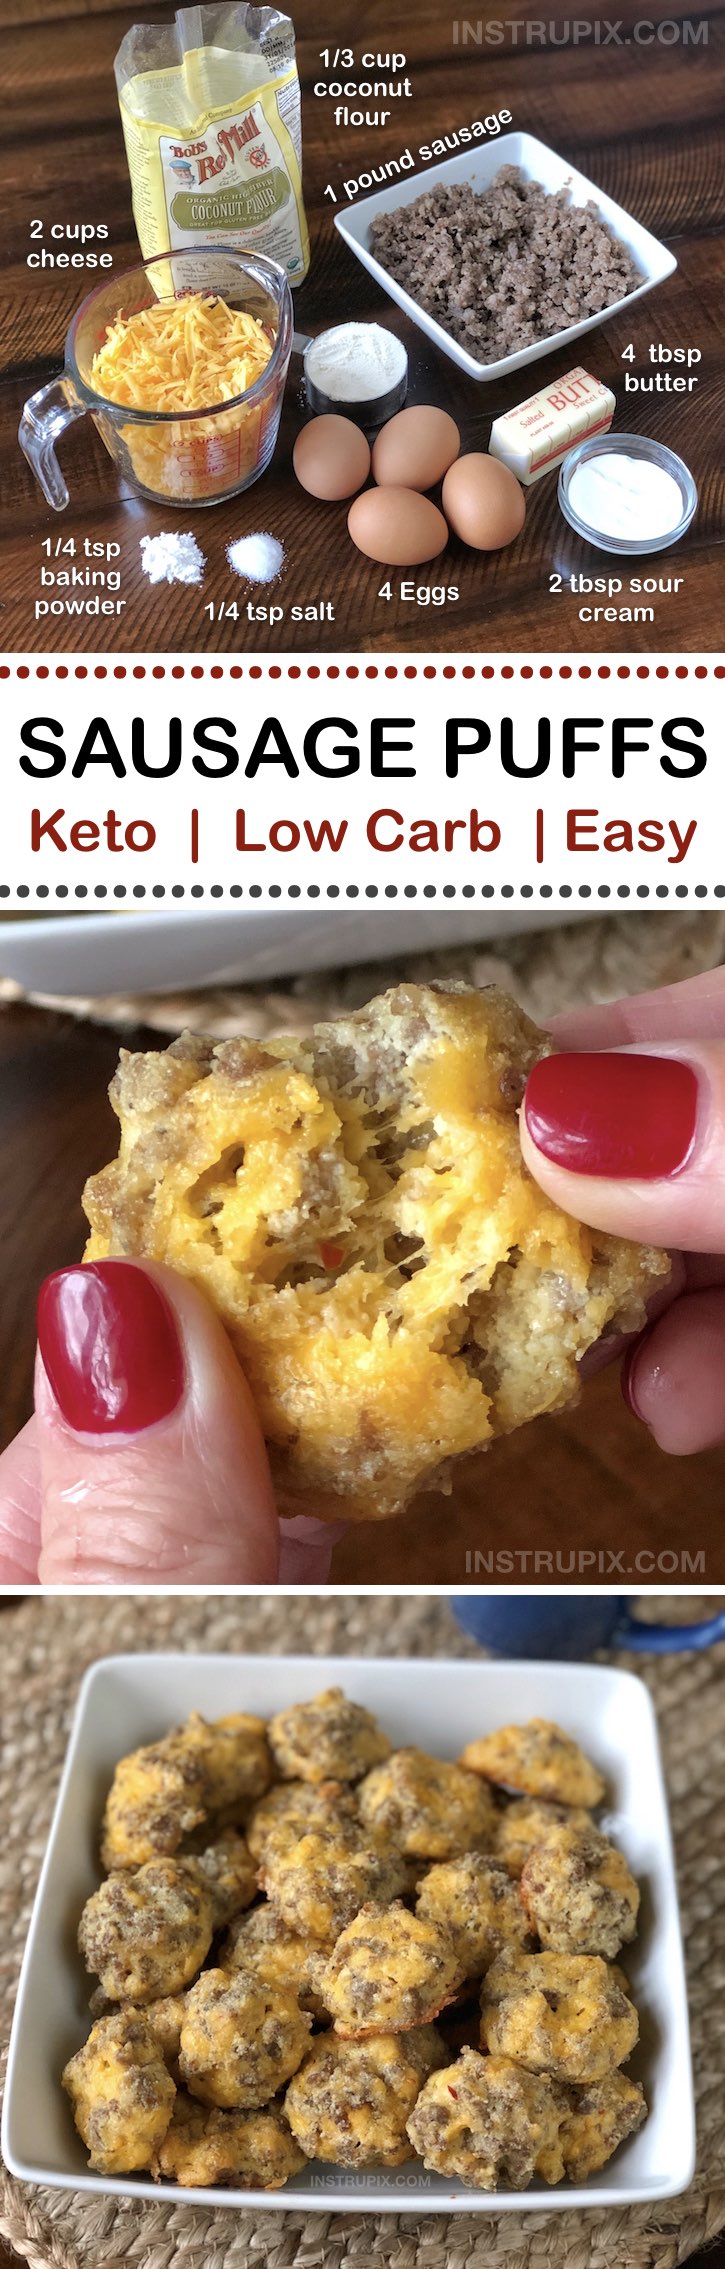 Cheesy Sausage Puffs | An easy low carb and keto recipe idea for on the go! They're perfect for breakfast and snacks through out the day. Easy Ketogenic Diet, Atkins and Diabetic Recipe for weight loss... low carb but full of flavor!! Instrupix.com